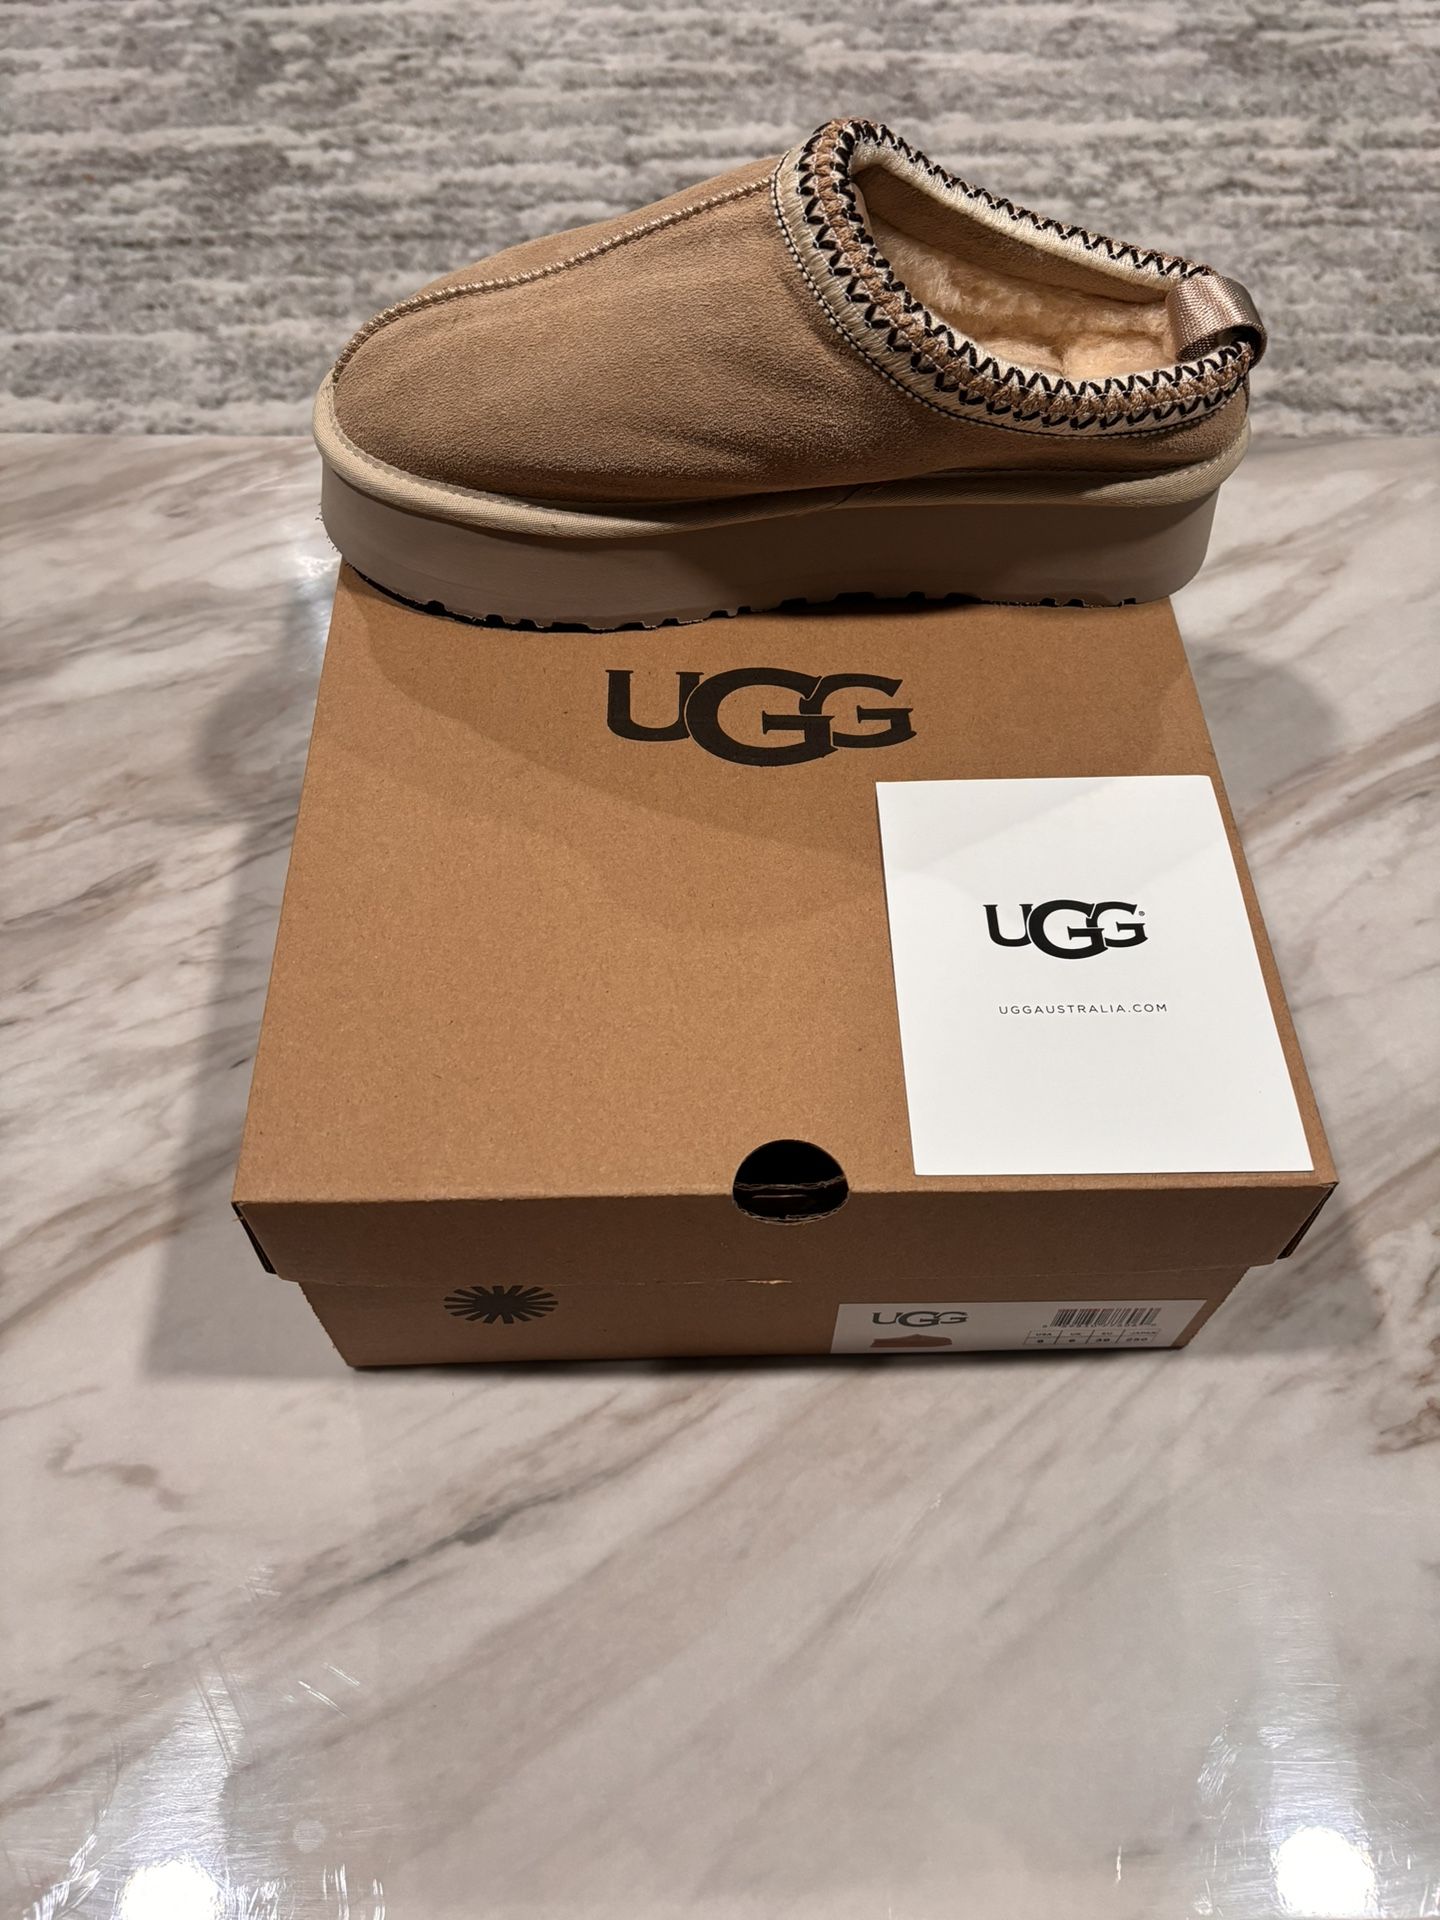 Ugg Tazz  Mustard Seed Woman’s Size 8